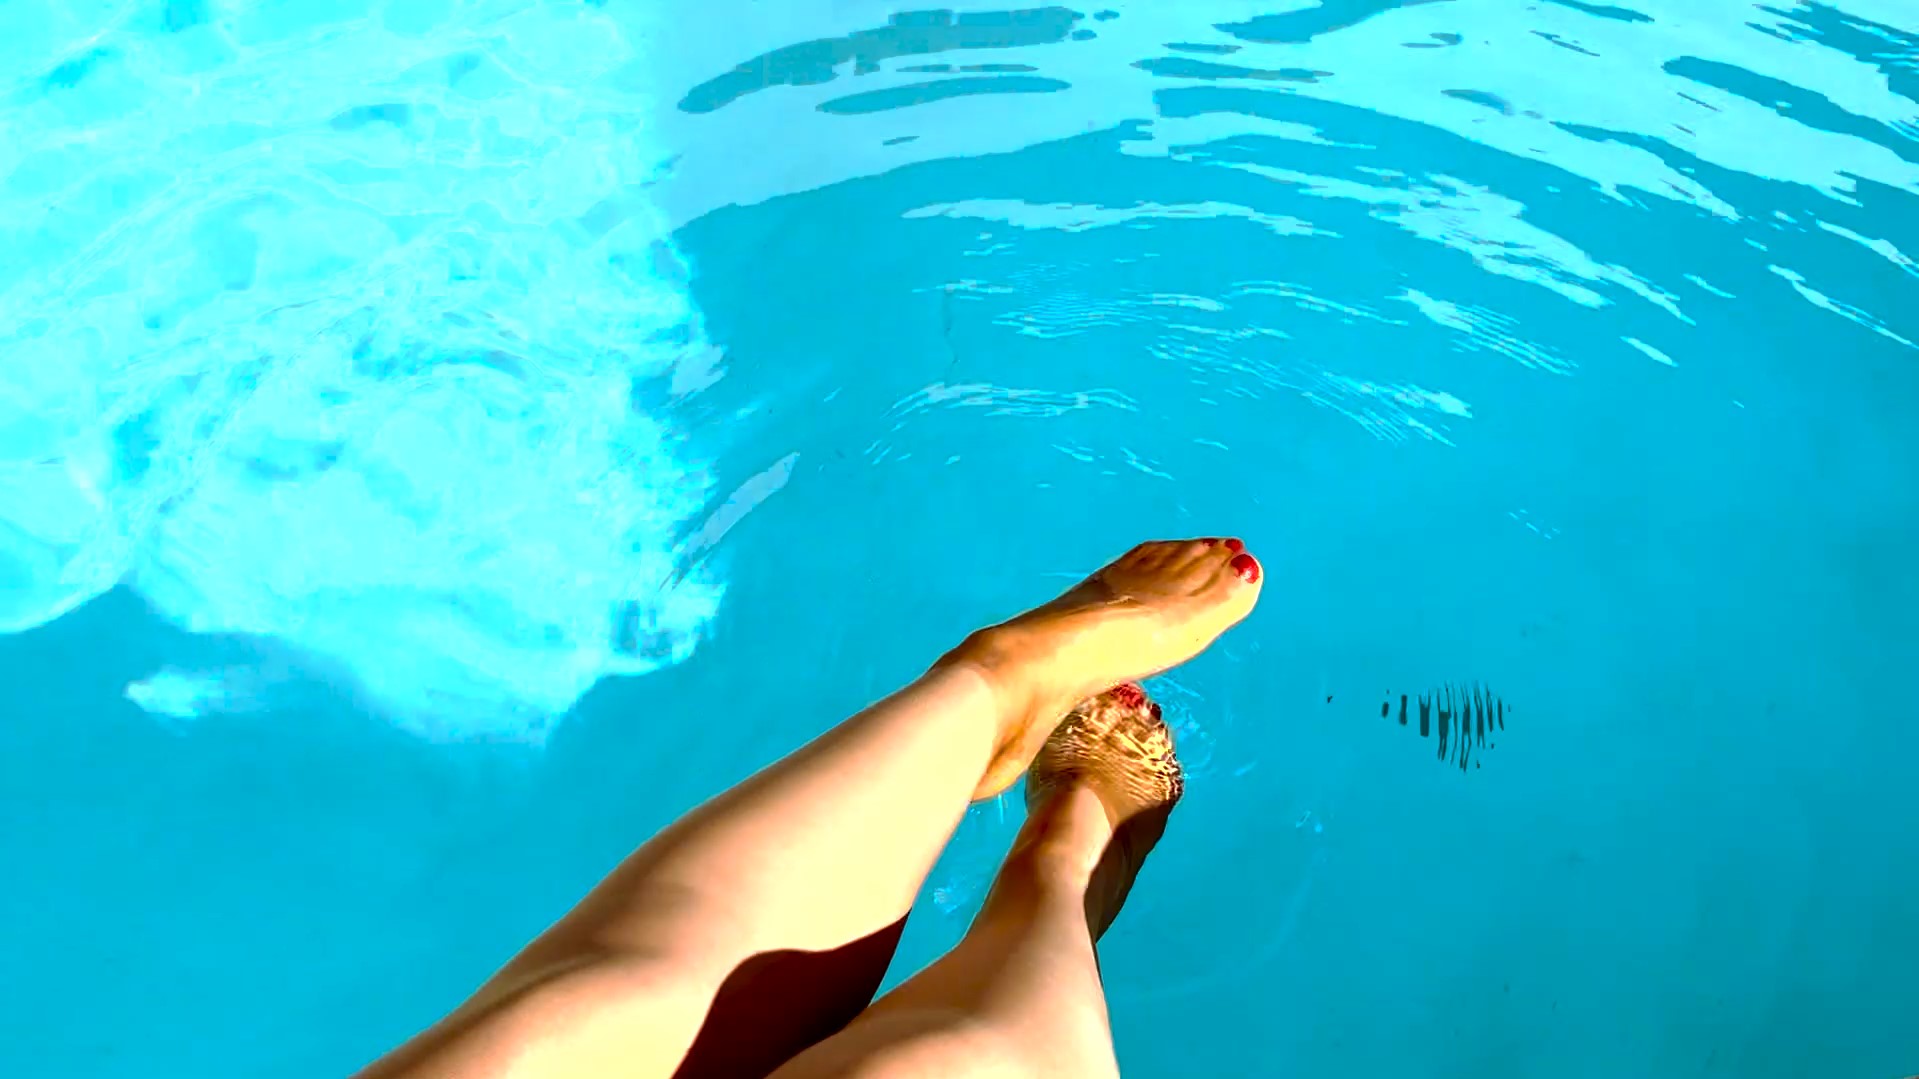 Dipping my feet in the water wearing pantyhose